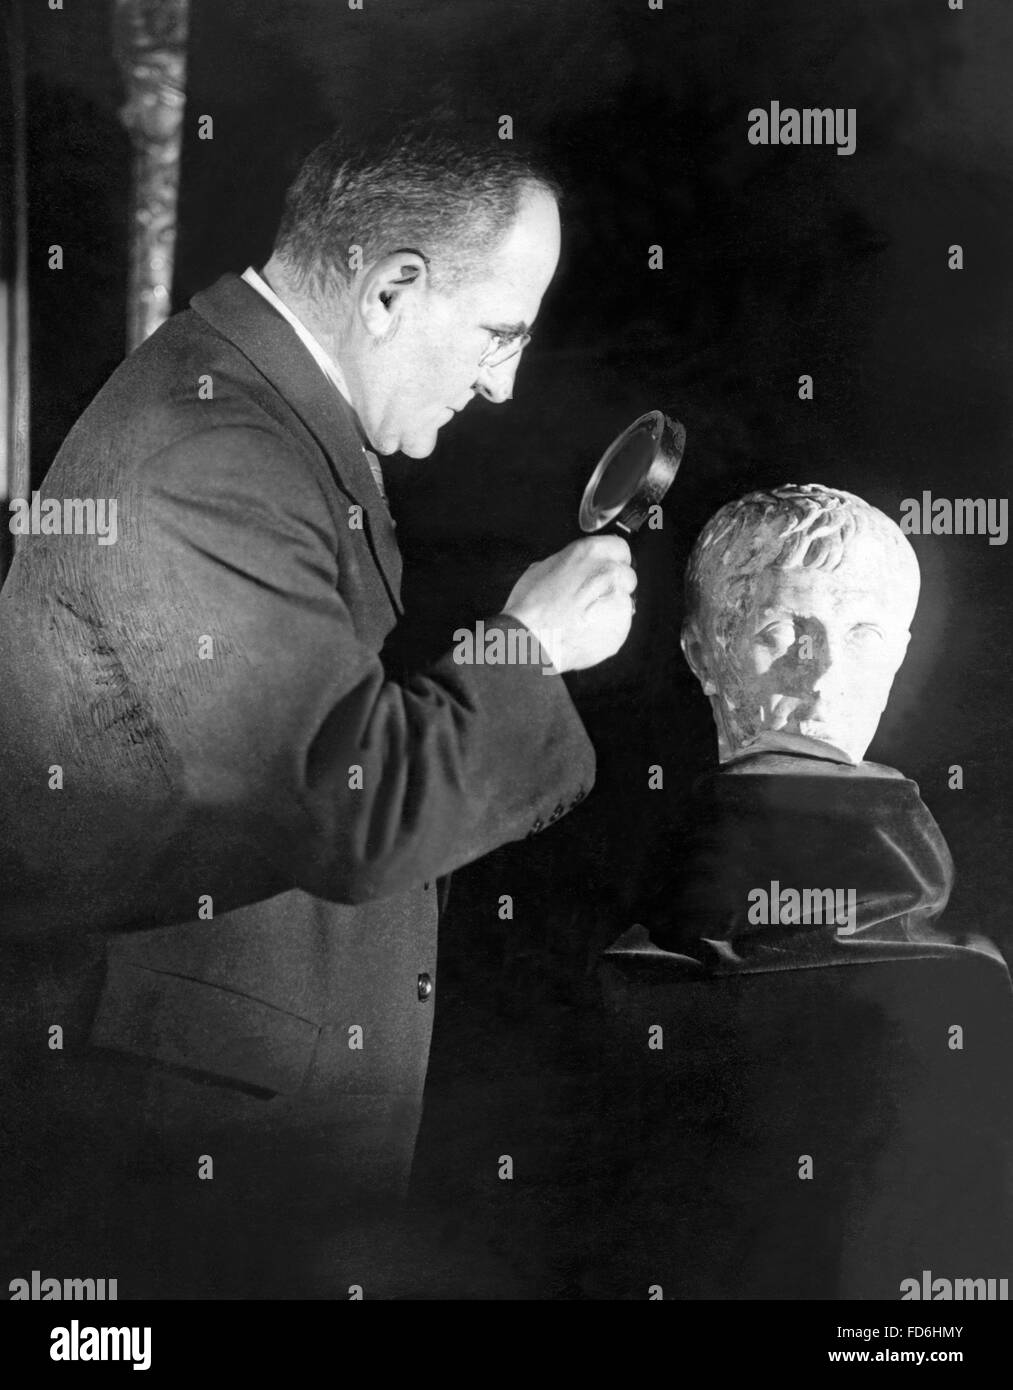 Inspection of sculpture of Augustus Ceasar in New York, 1925. Stock Photo